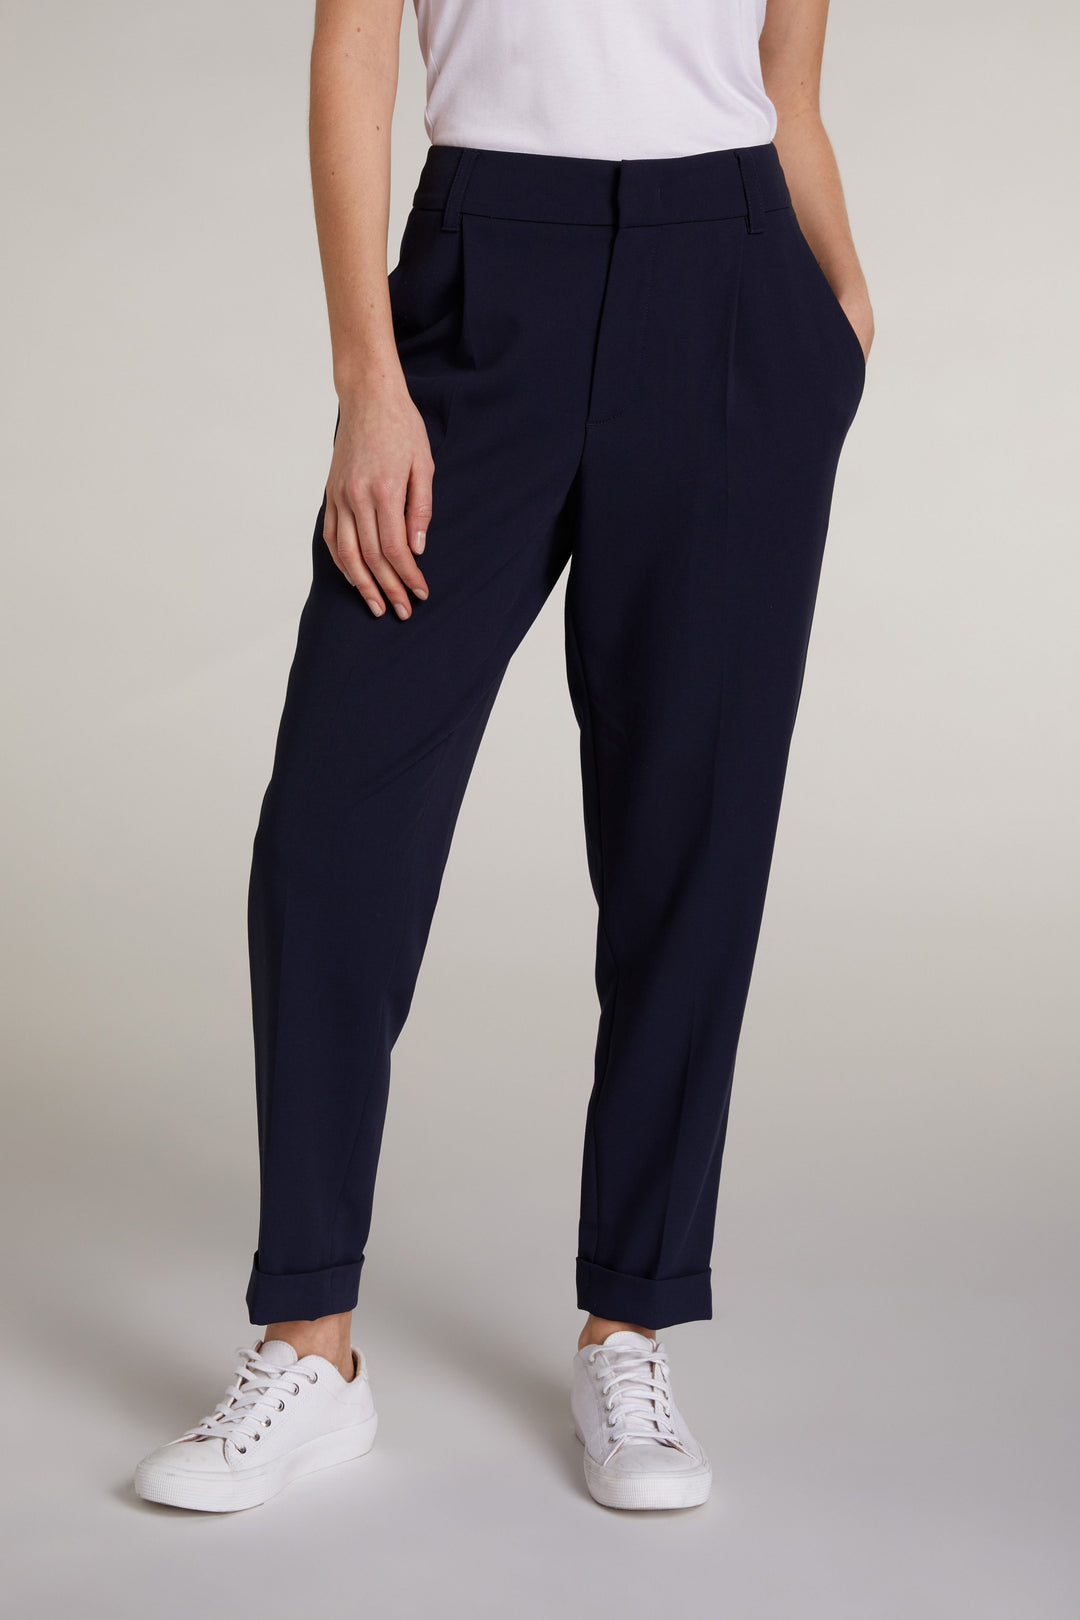 Oui 72712 Navy Trousers Front | Dotique